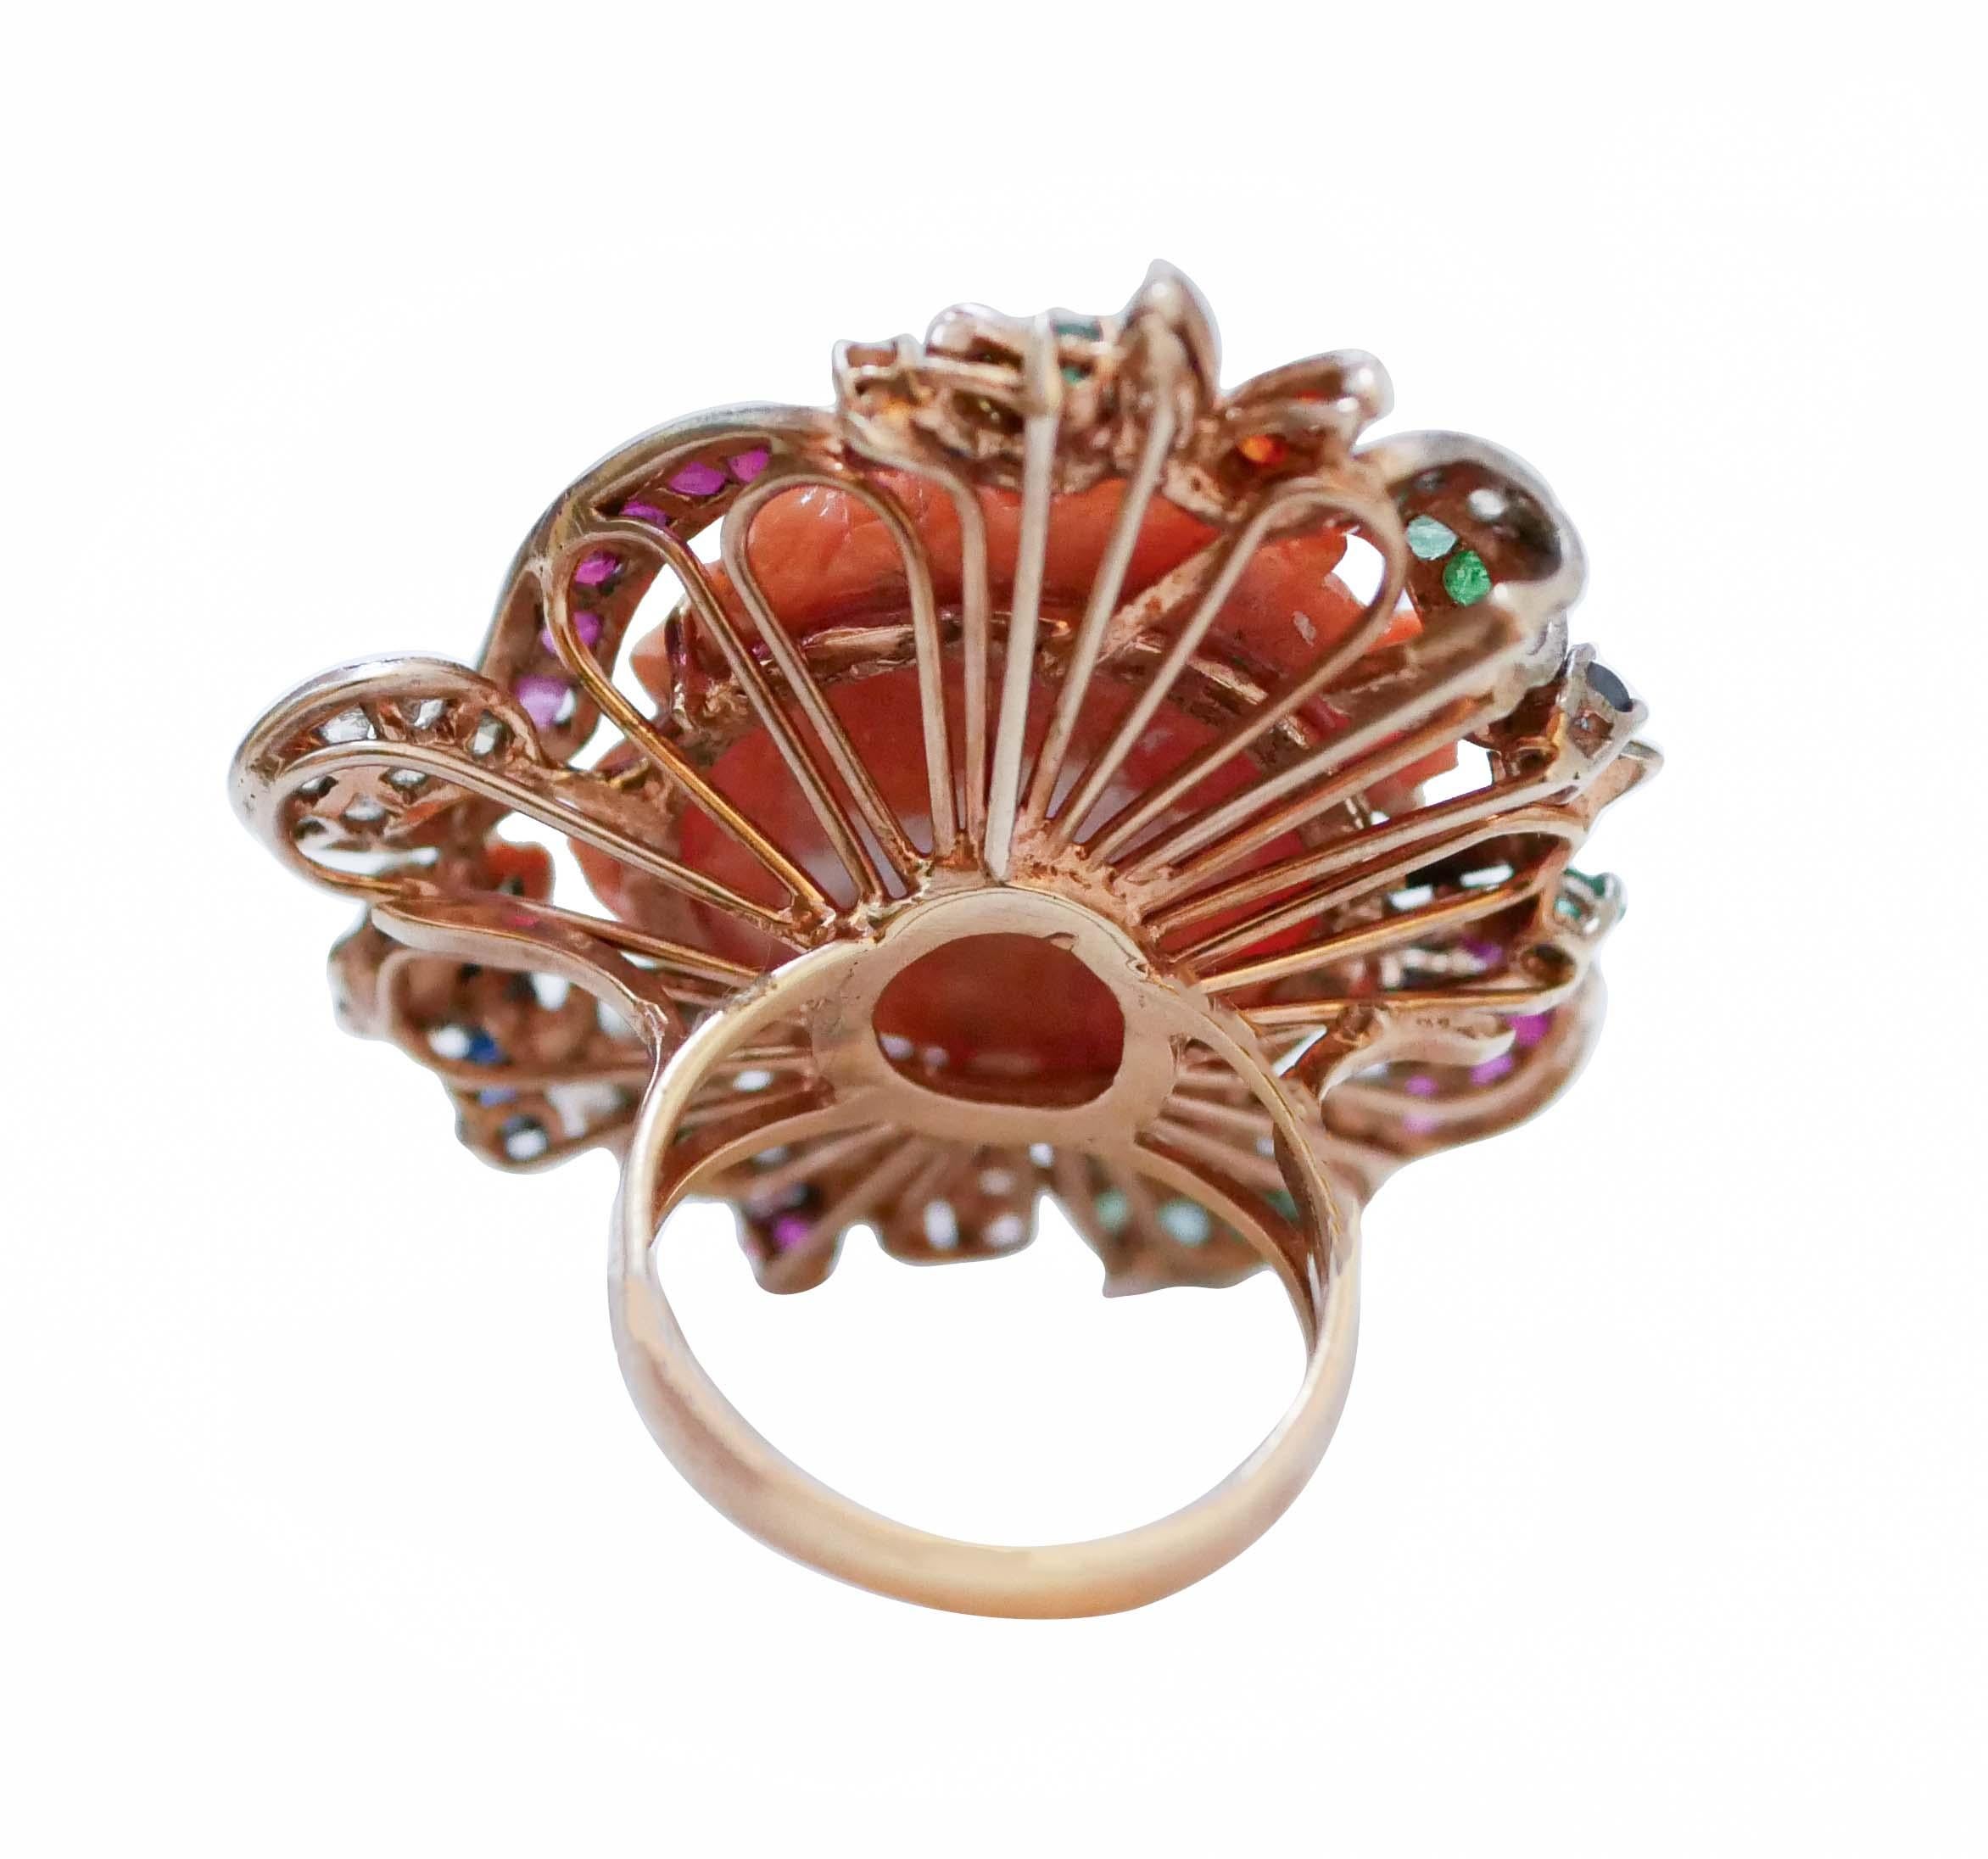 Retro Coral, Emeralds, Rubies, Sapphires, Diamonds, Rose Gold and Silver Ring. For Sale